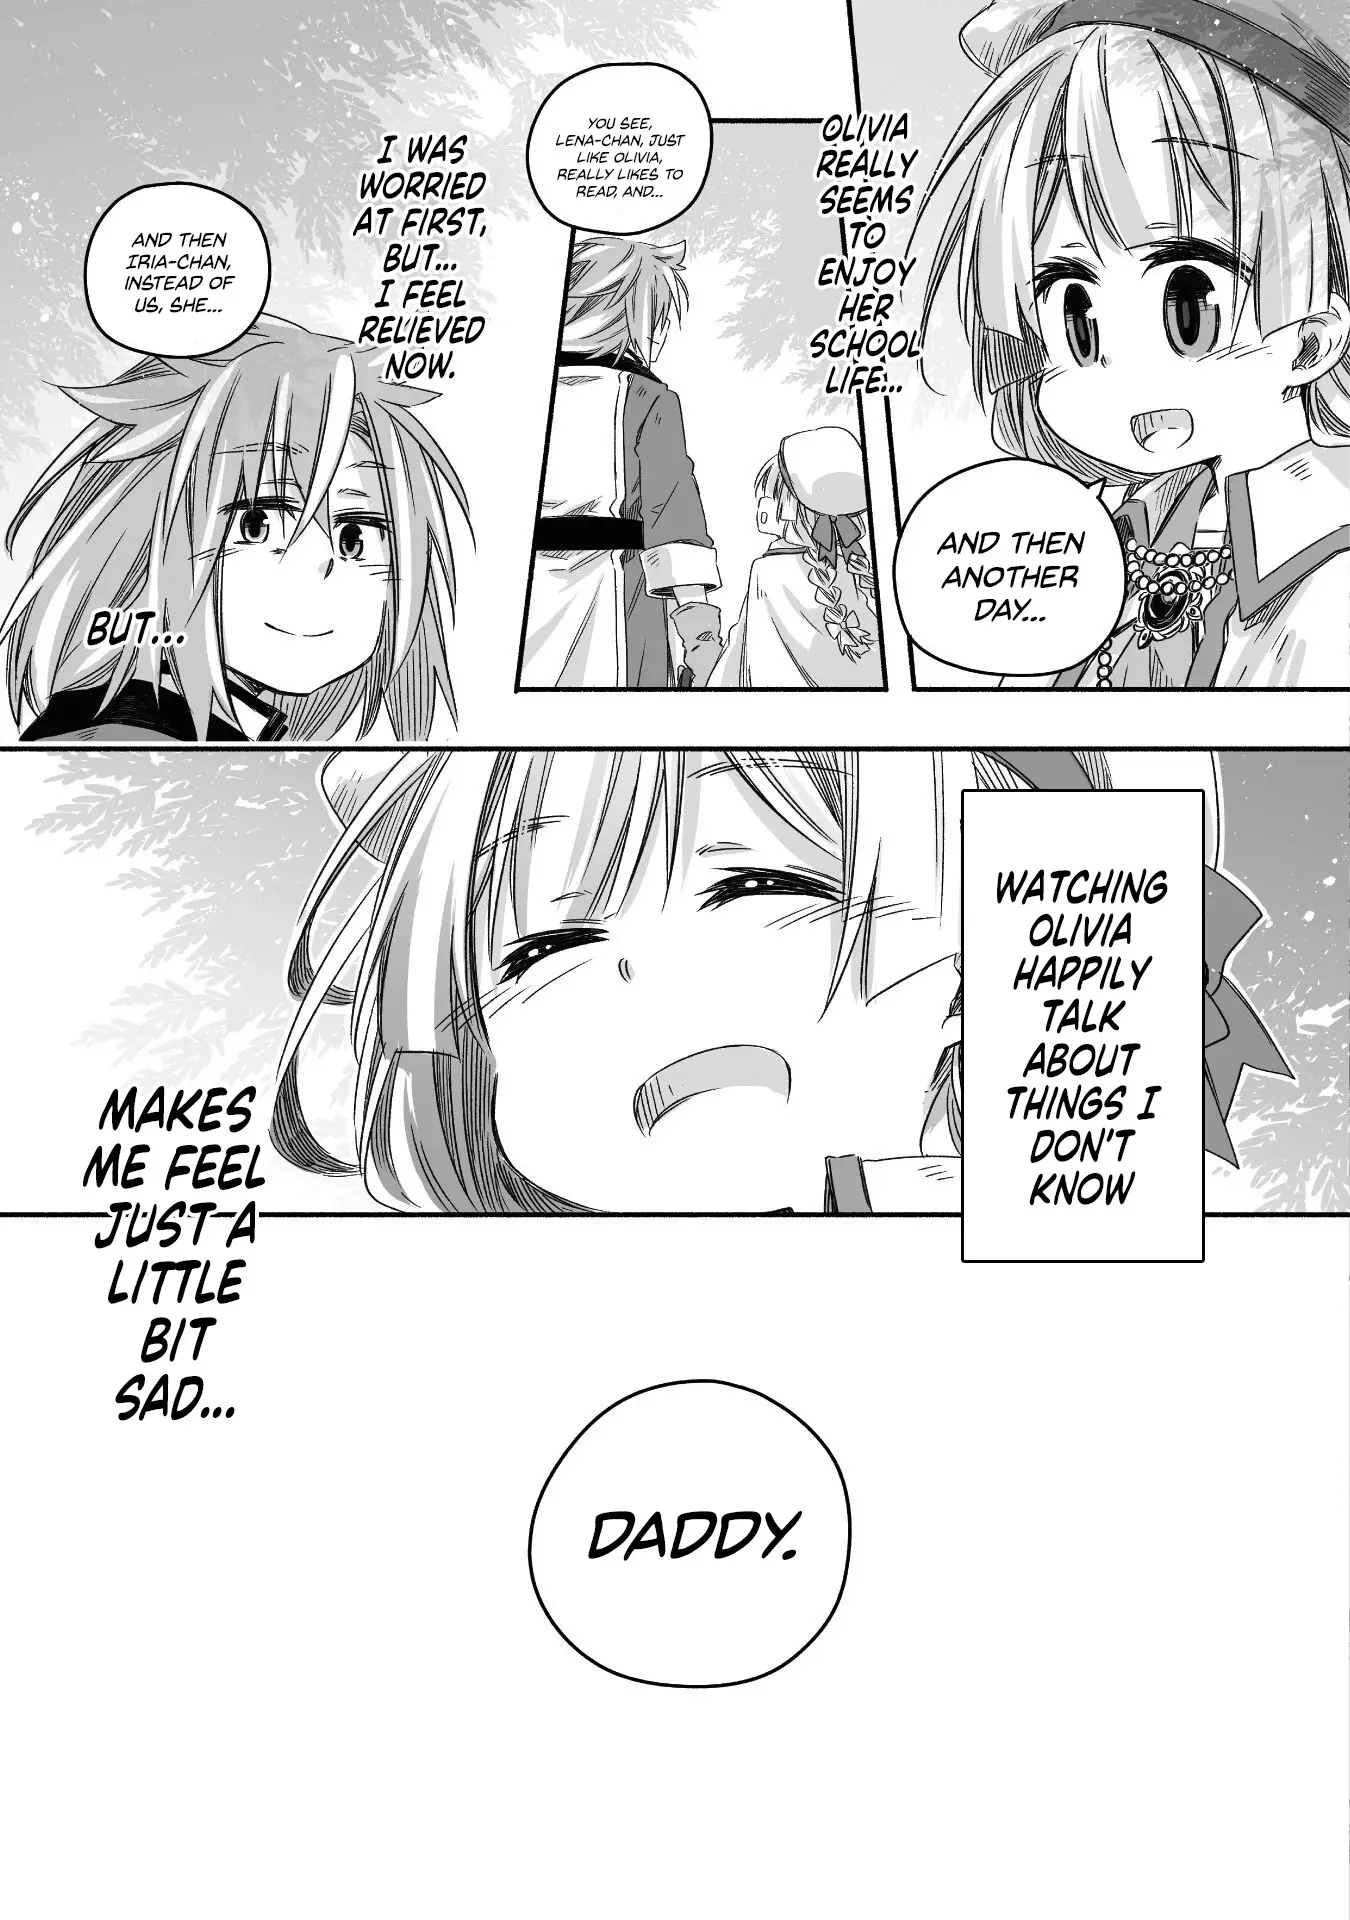 Parenting Diary Of The Strongest Dragon Who Suddenly Became A Dad ～ Cute Daughter, Heartwarming And Growing Up To Be The Strongest In The Human World ～ - 18 page 7-57d5f0ac